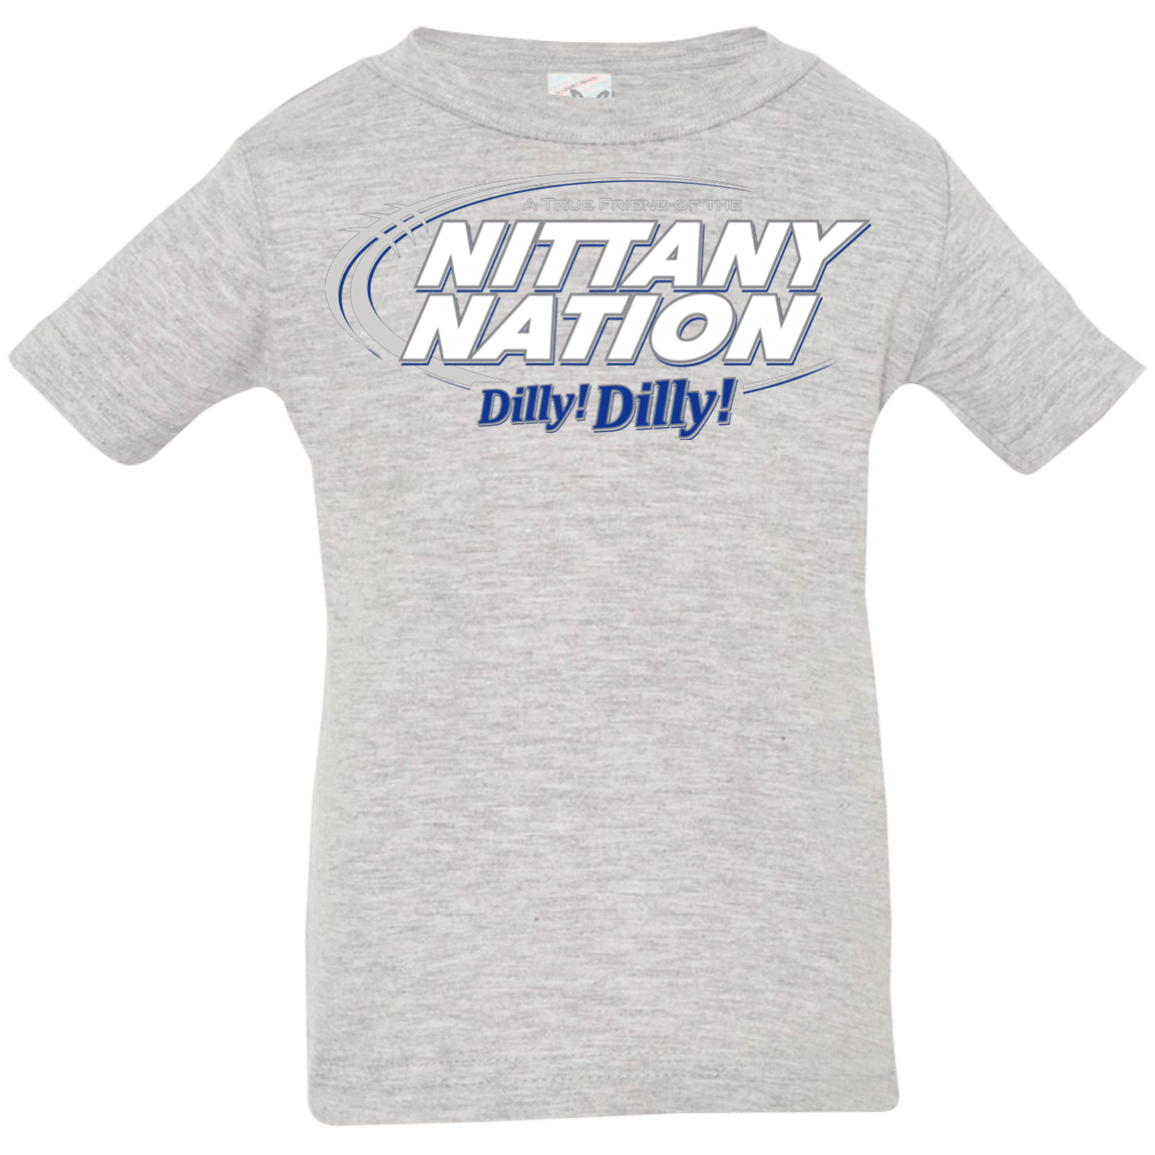 T-Shirts Heather / 6 Months Penn State Dilly Dilly Infant Premium T-Shirt